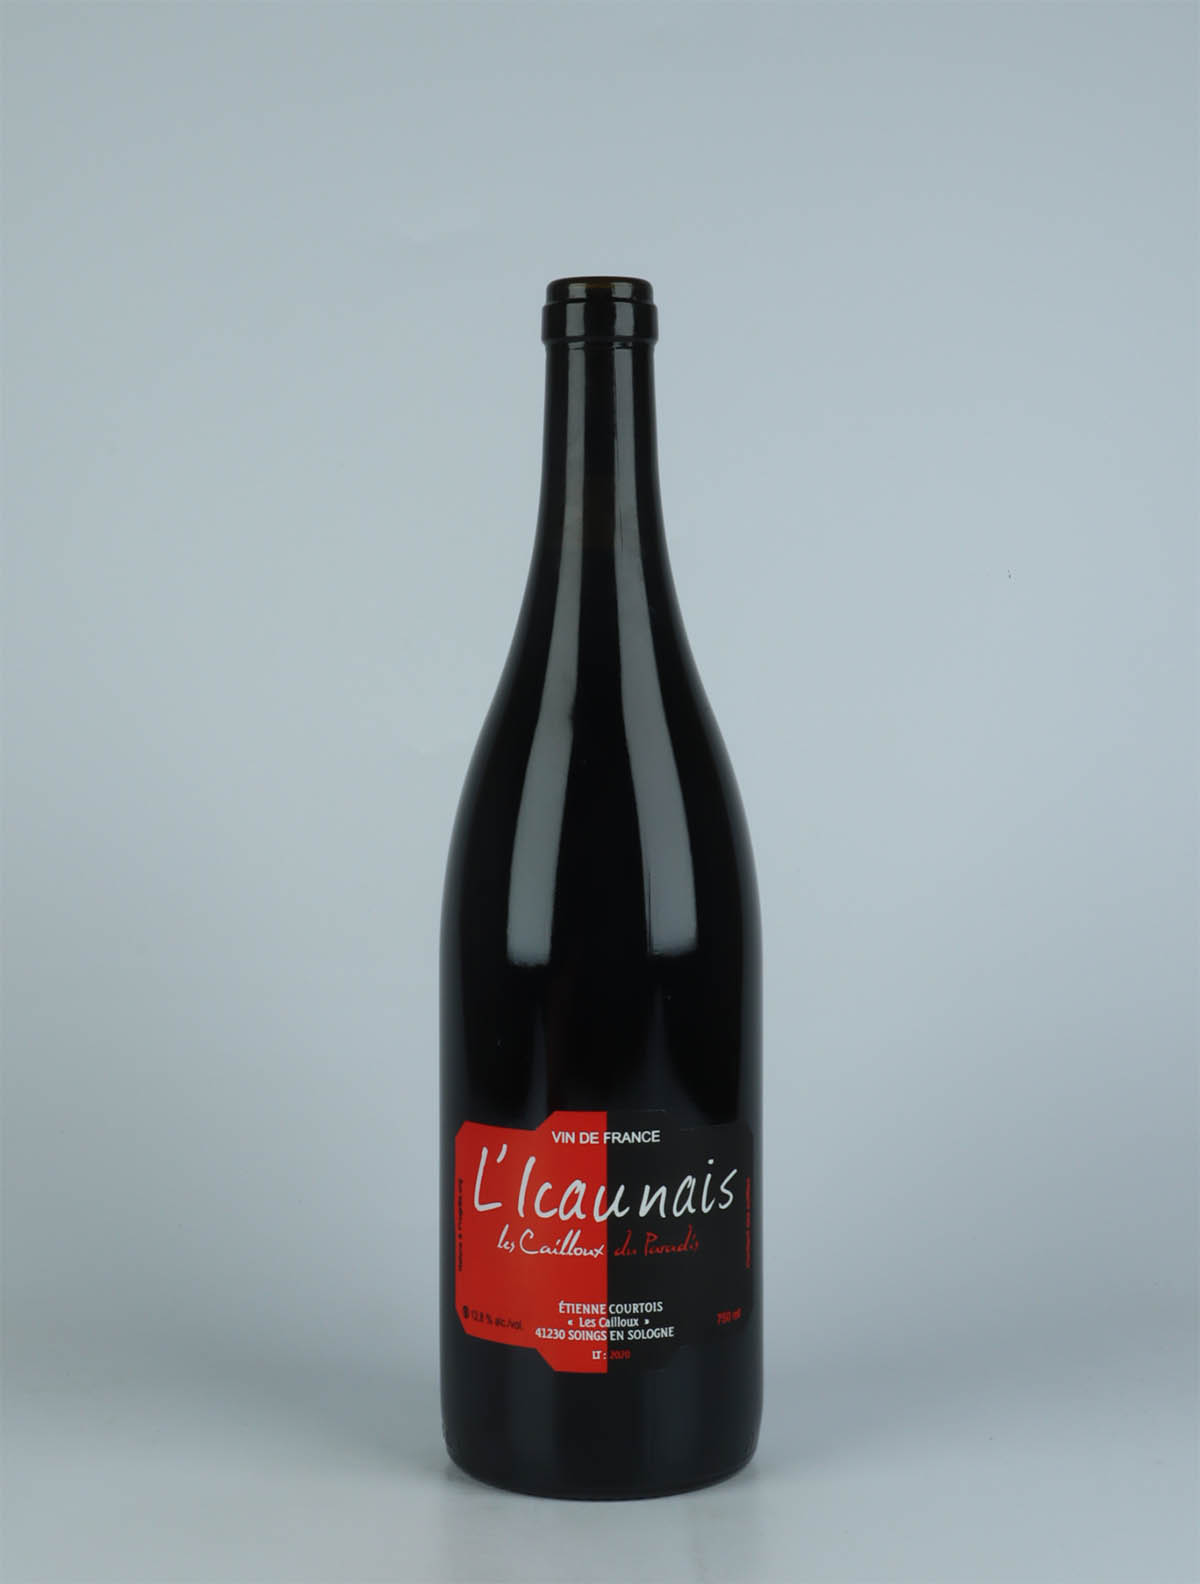 A bottle 2020 L'Icaunais Red wine from Etienne Courtois, Loire in France